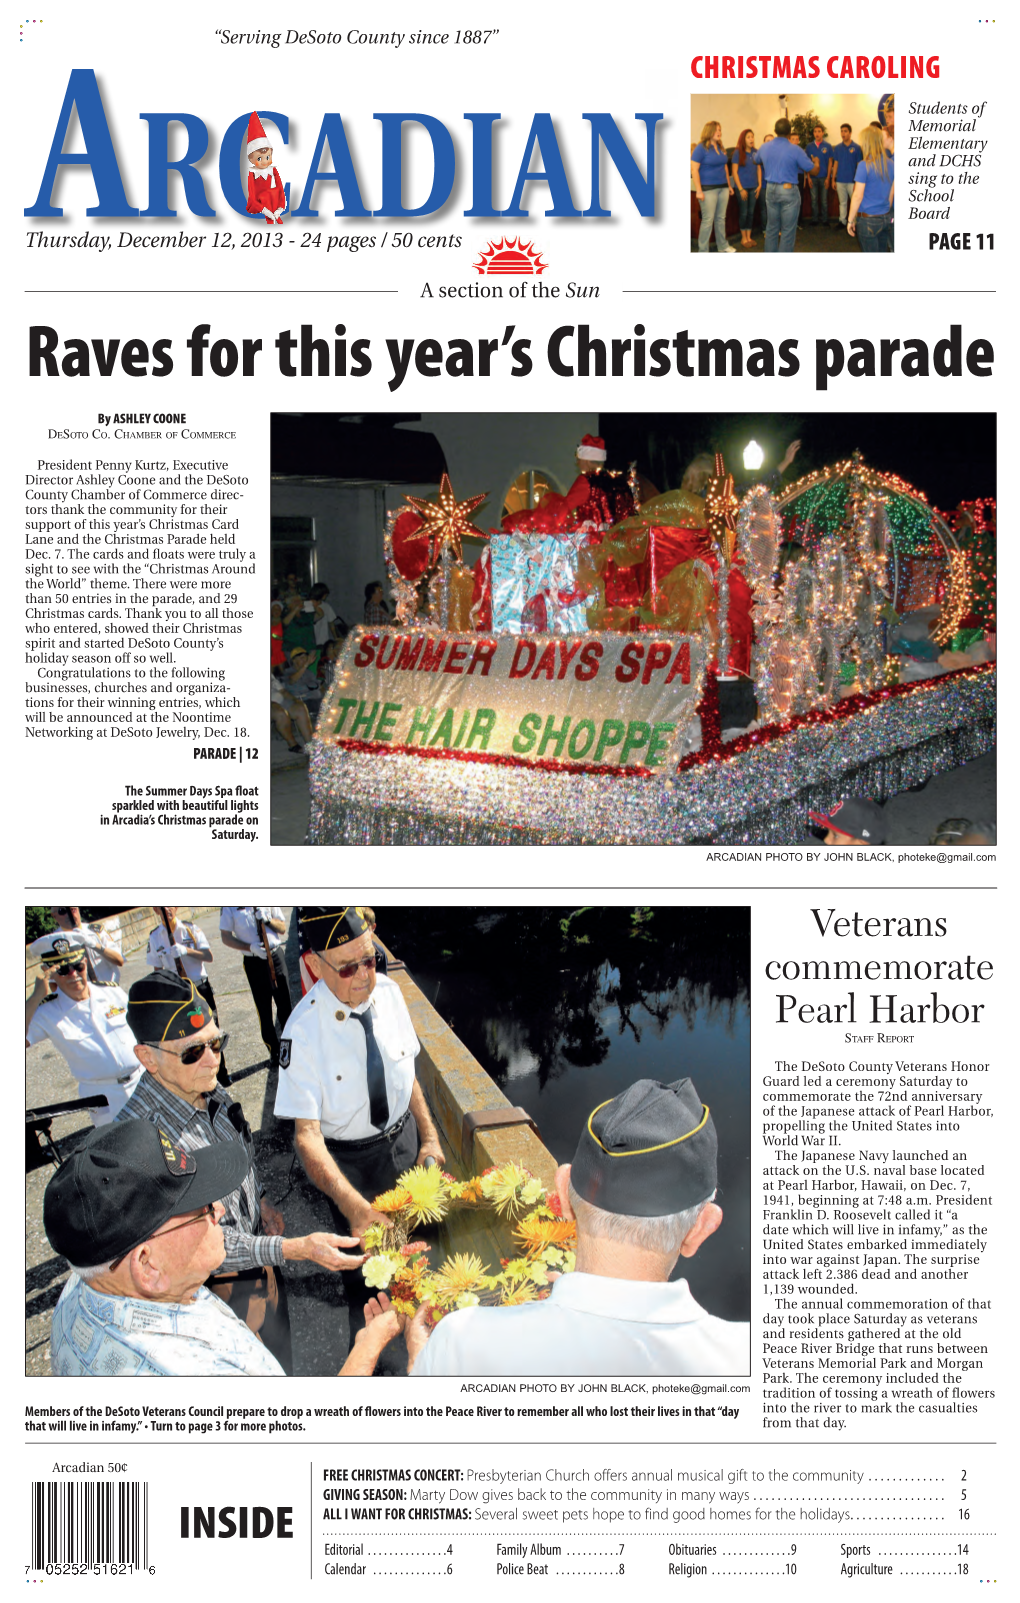 Raves for This Year's Christmas Parade